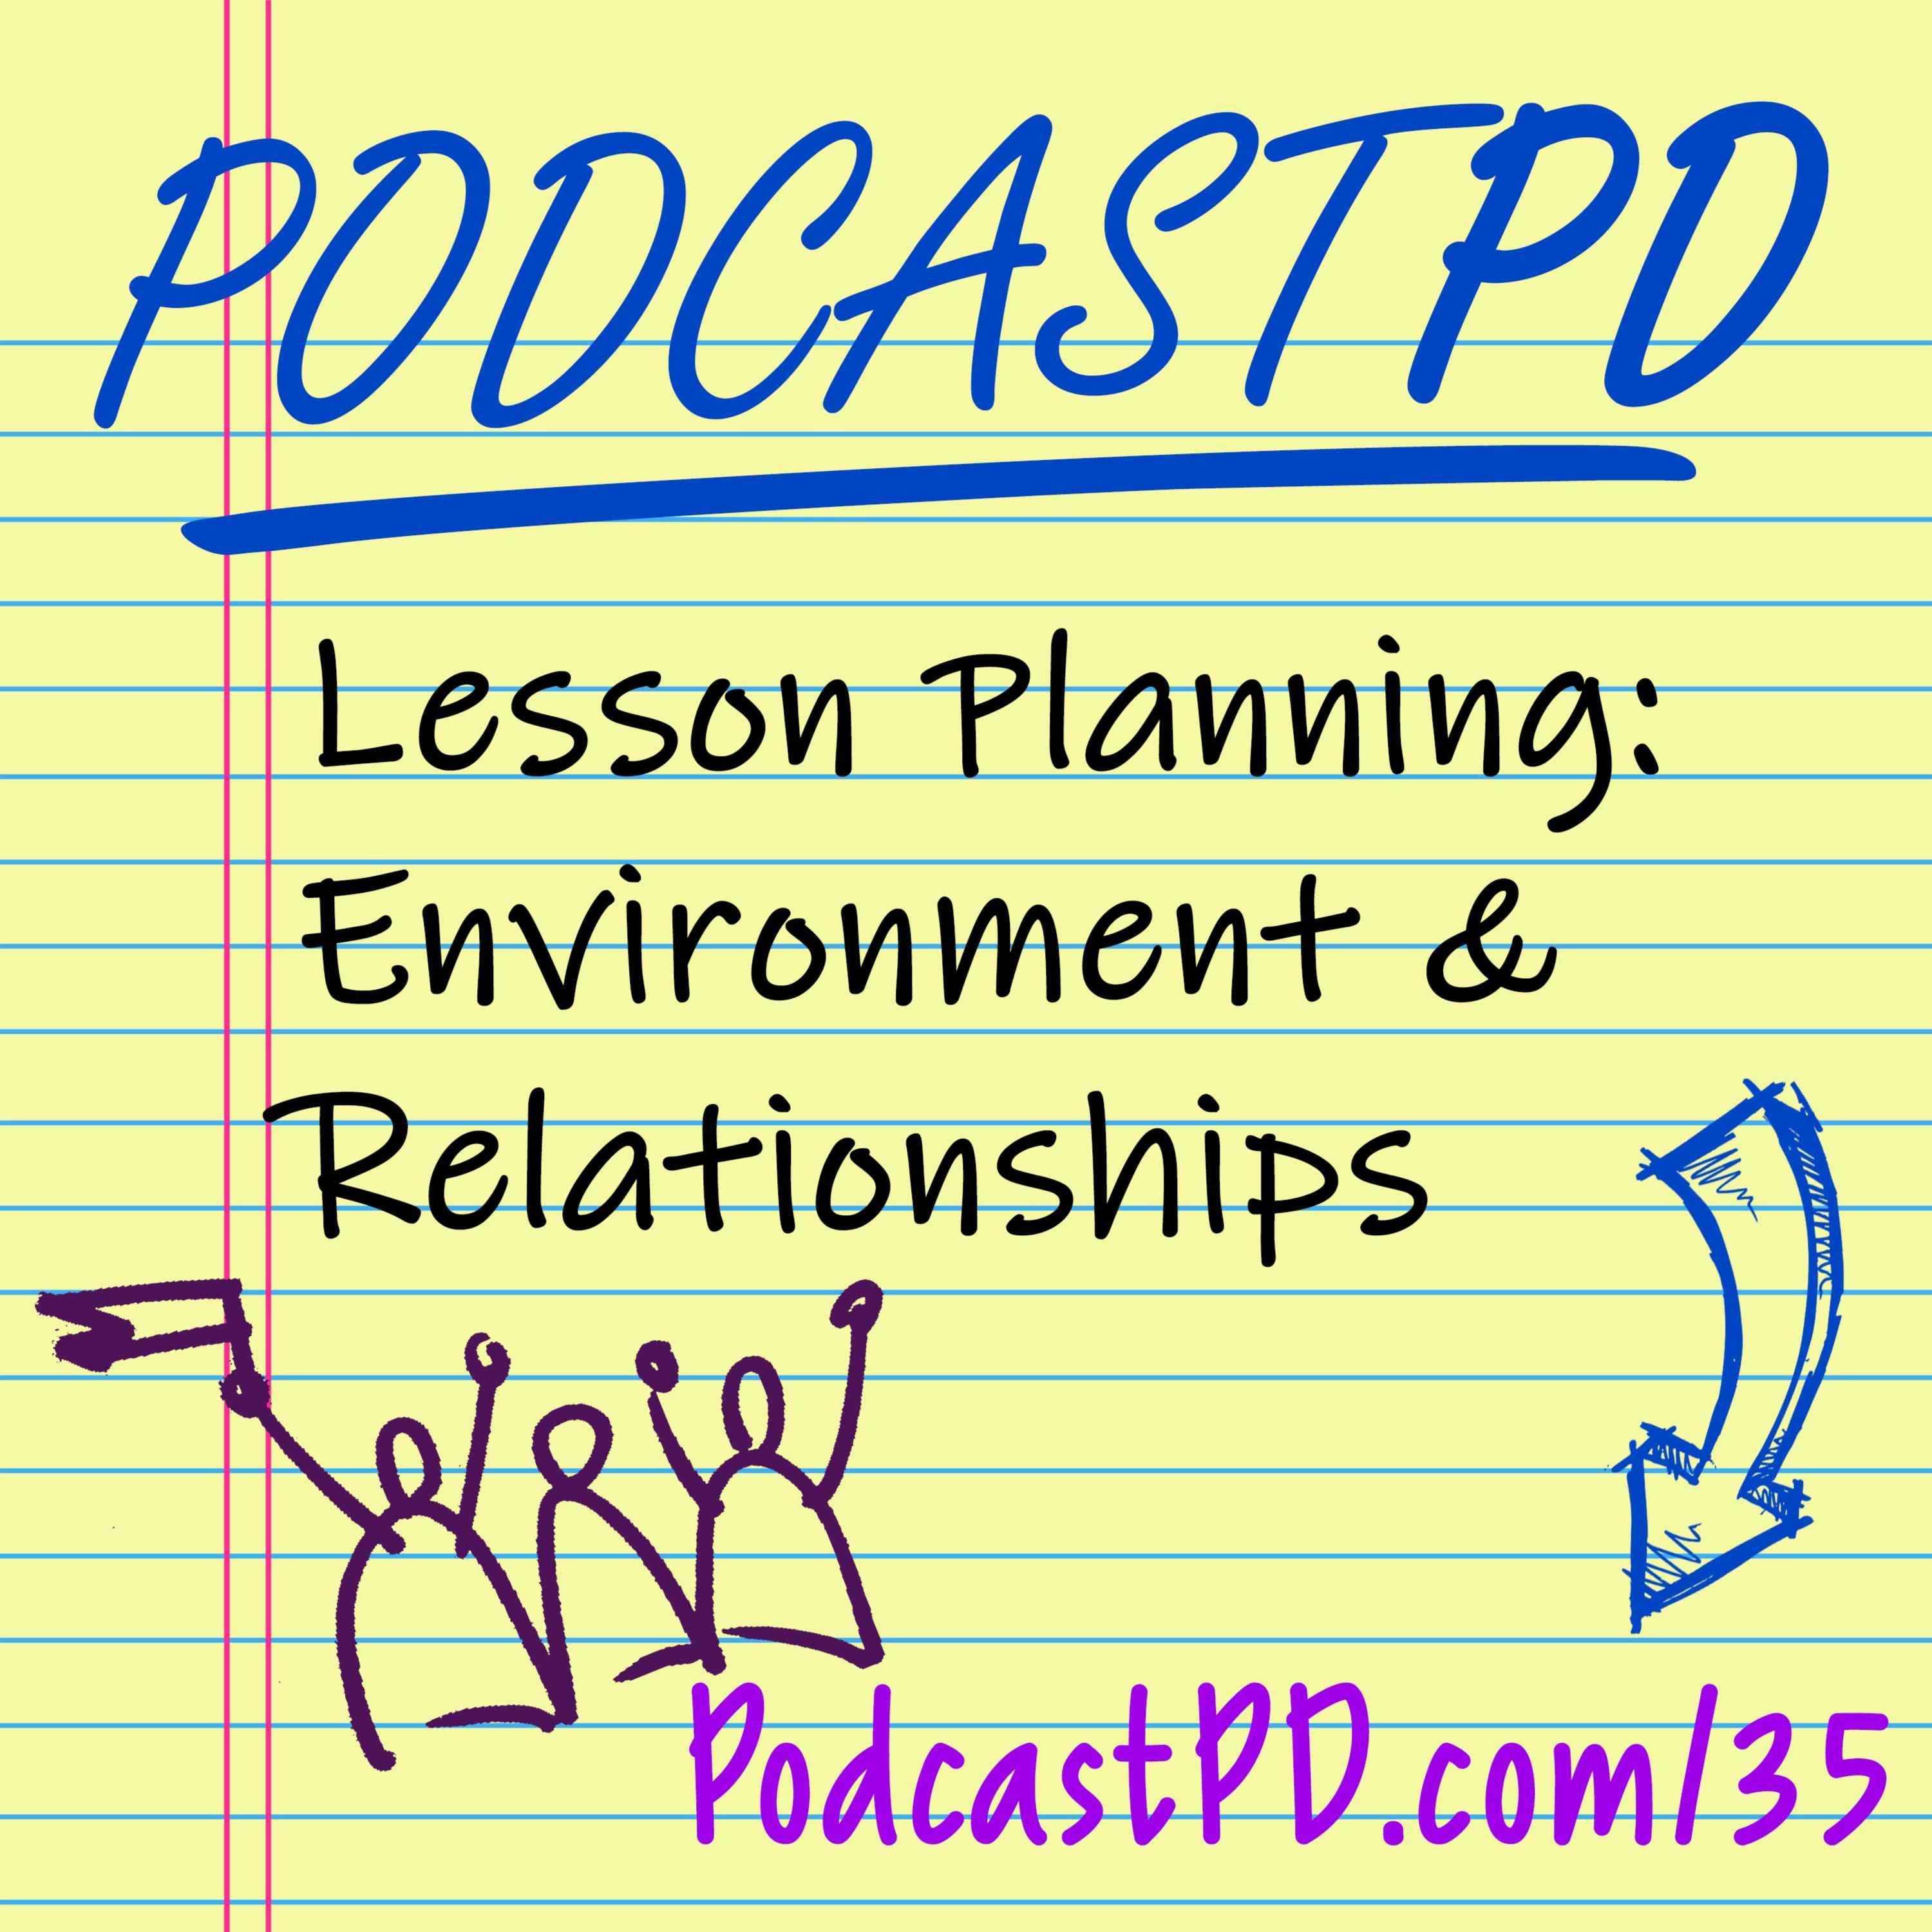 Lesson Planning: Environment & Relationships - PPD035 Image